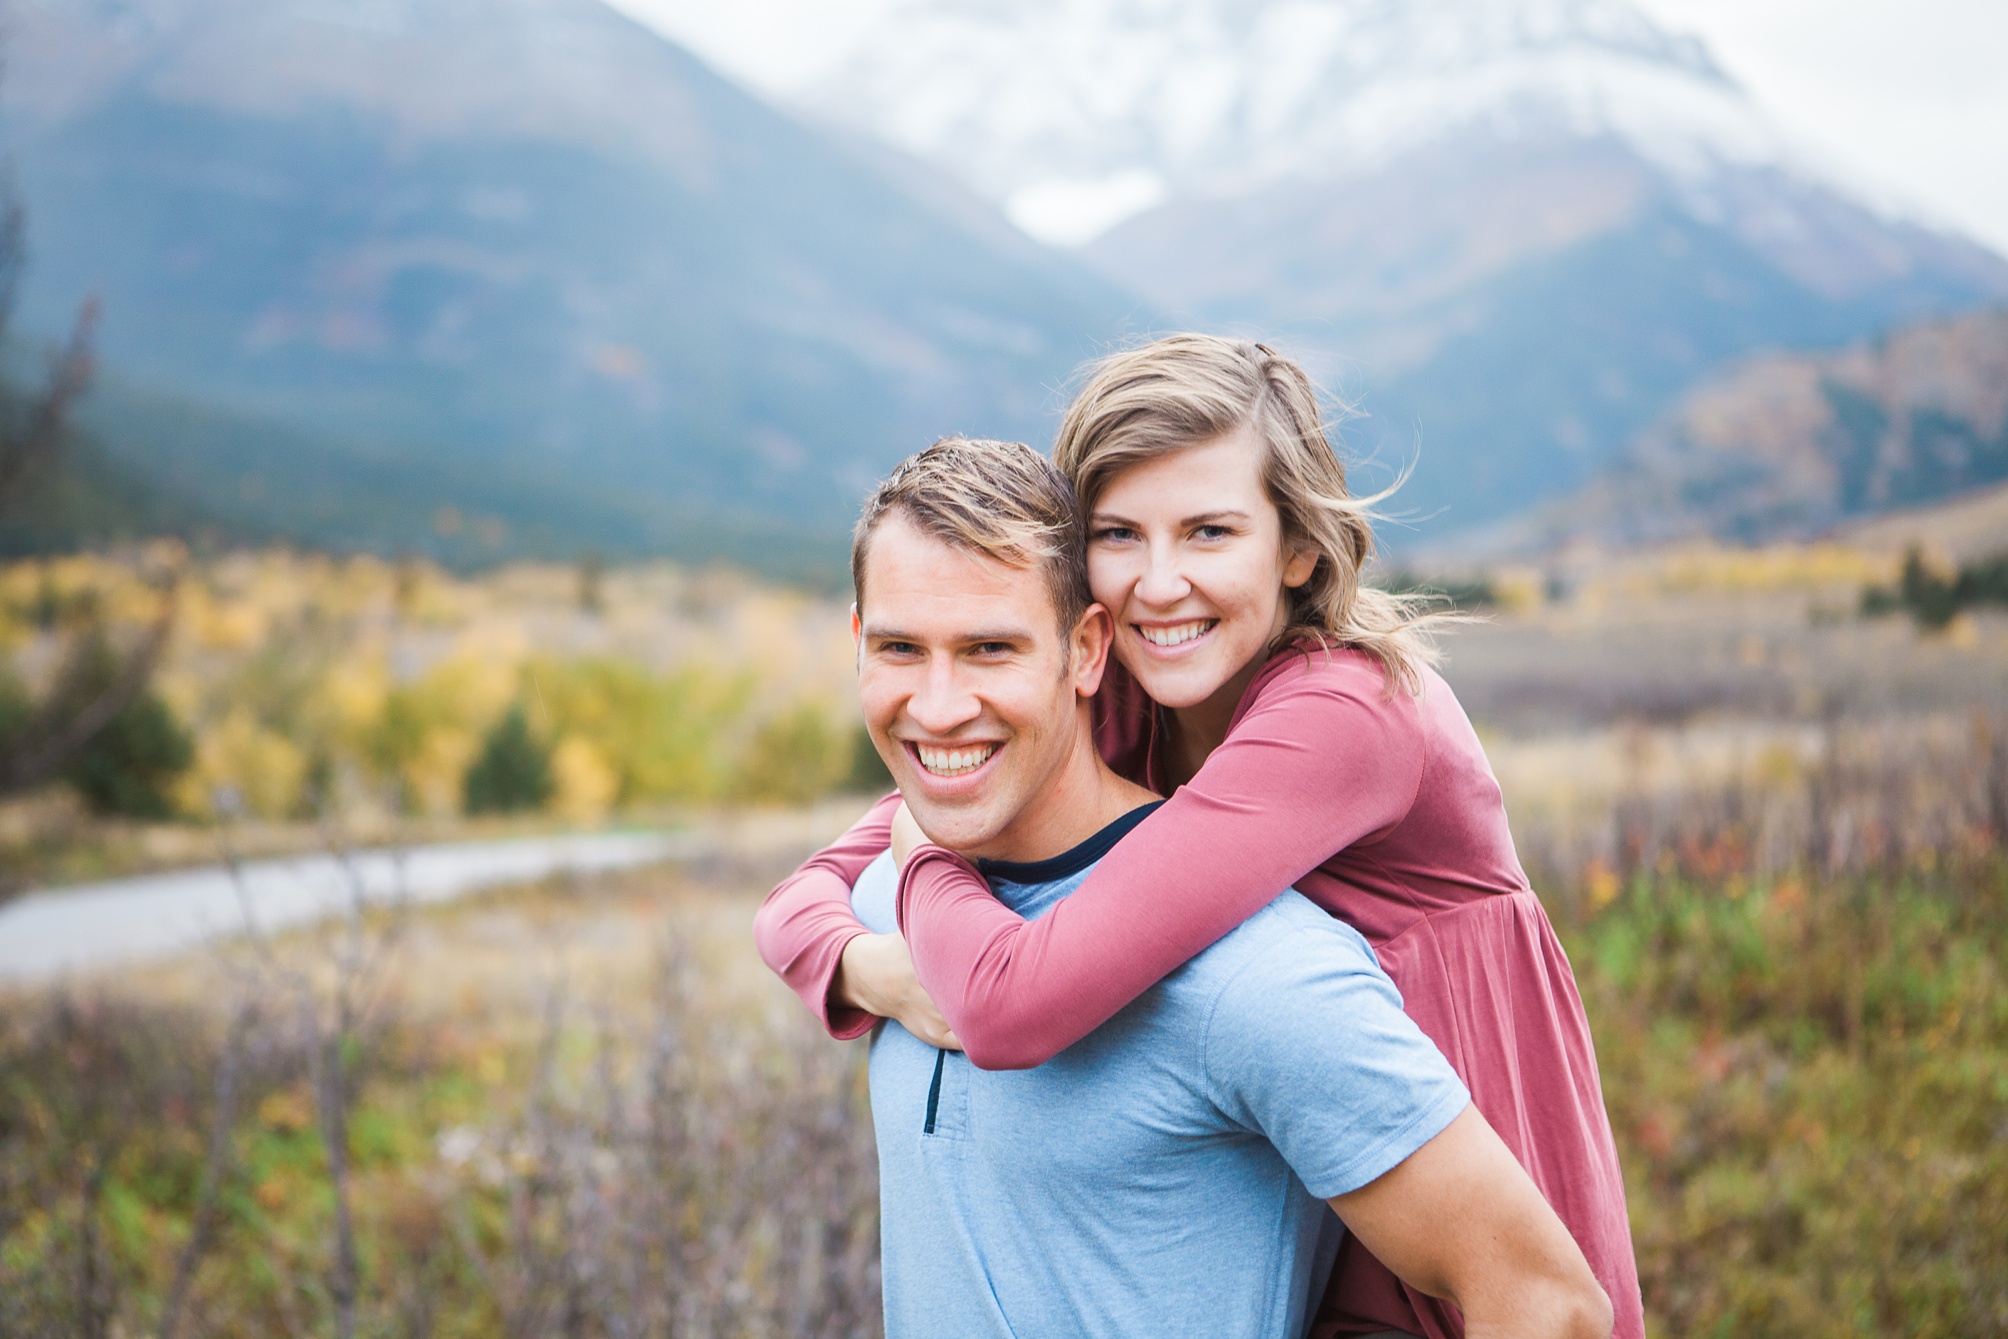 A romantic engagement session Waterton, AB